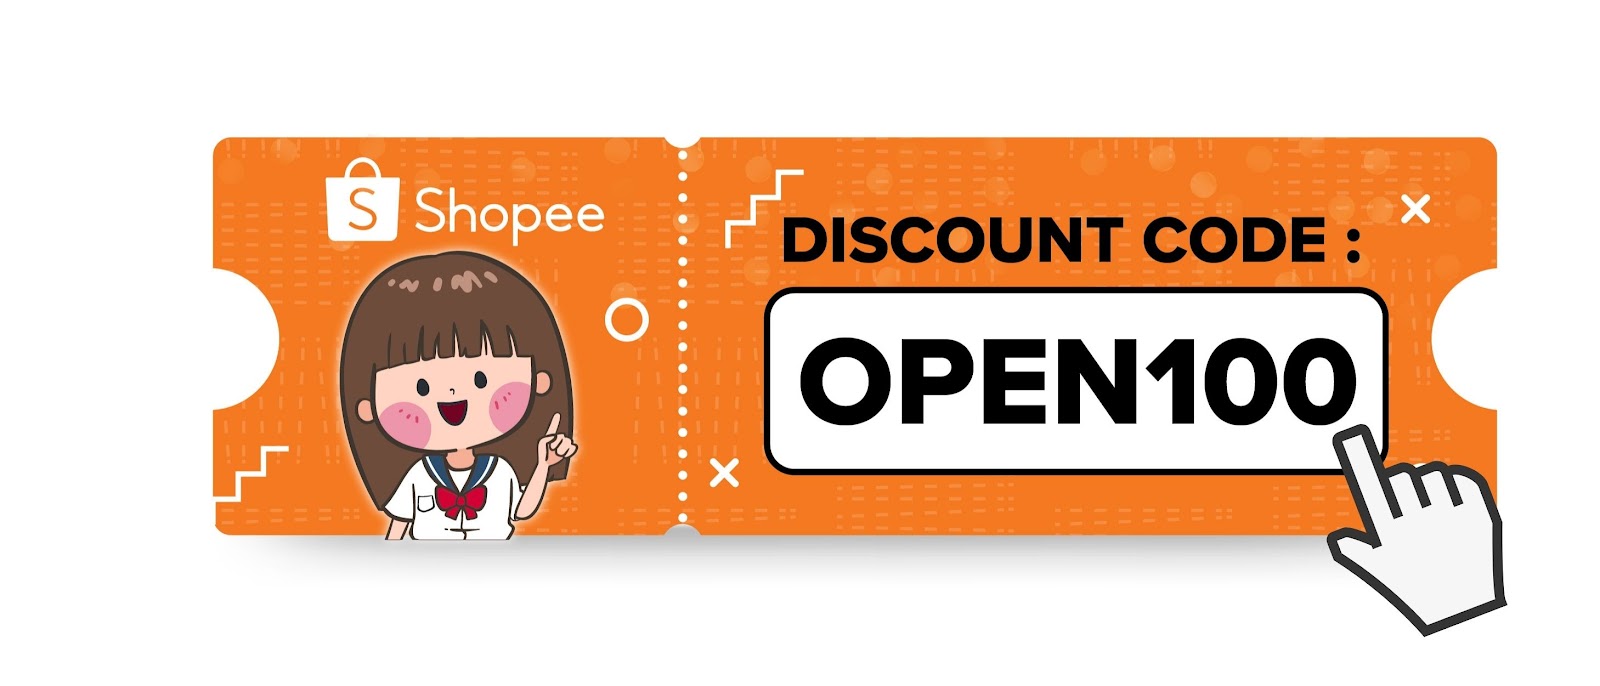 Discount code OPEN100 can use to discount Oh! Easy Hiragana book for 100 baht at Shopee.